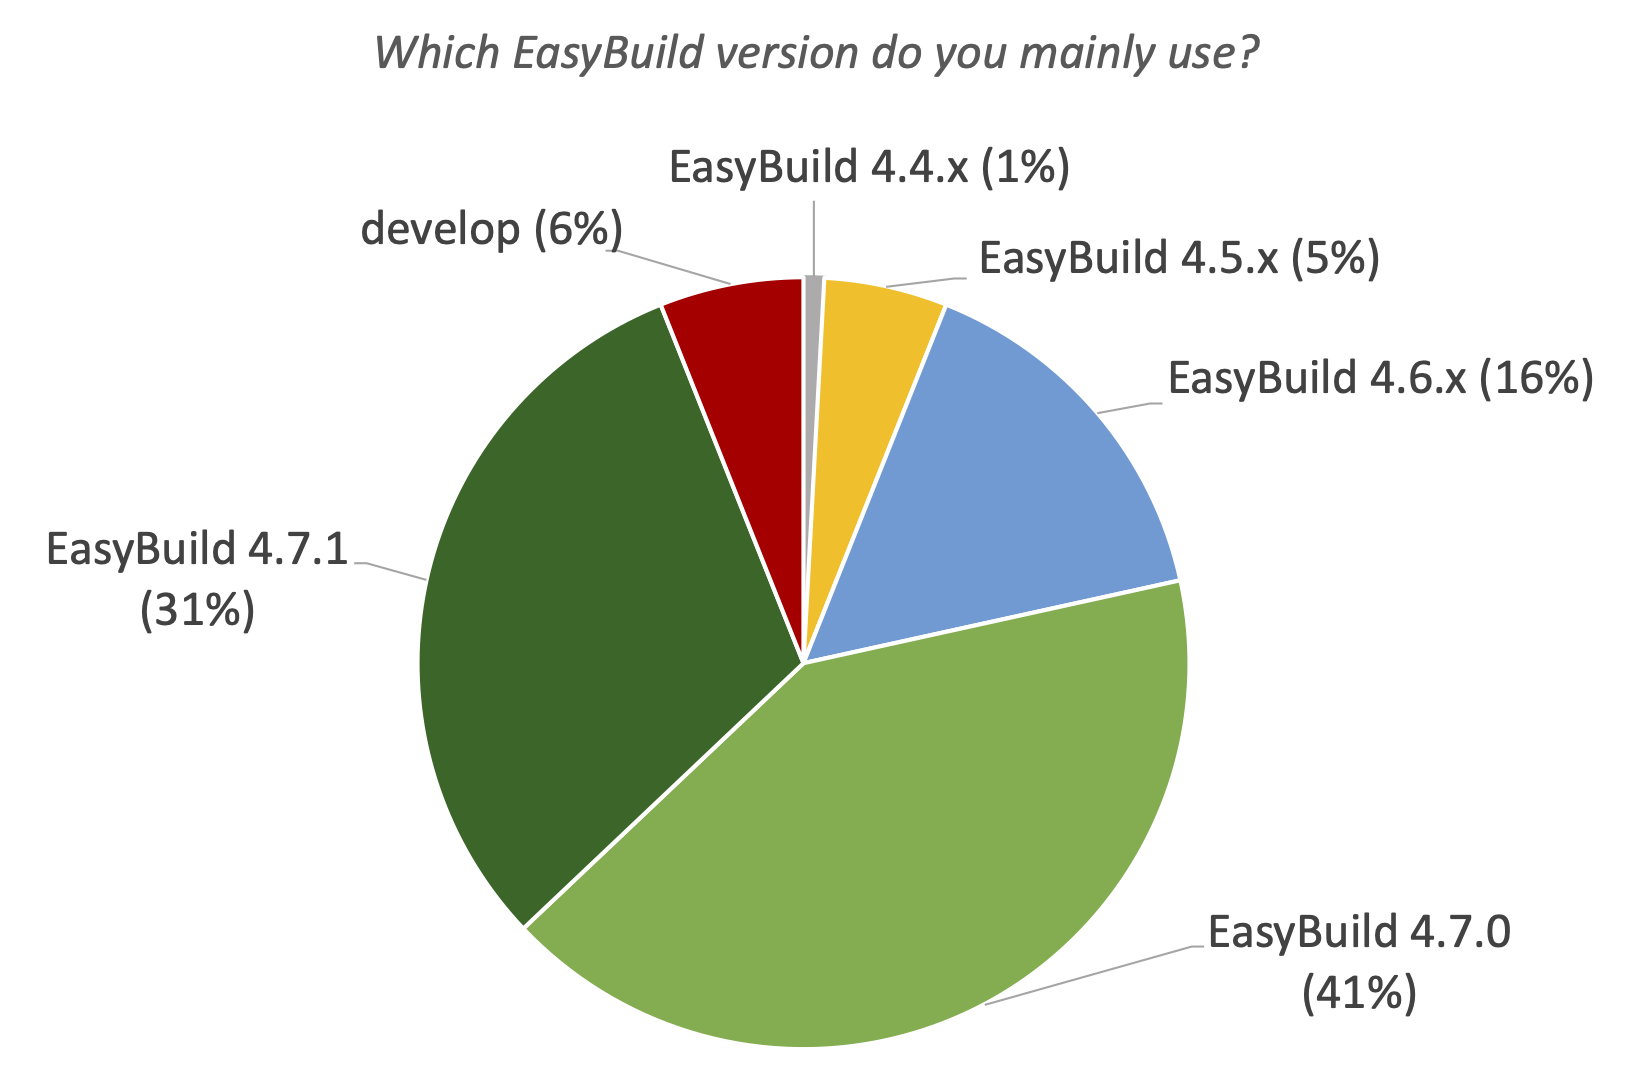 18. Which EasyBuild version do you mainly use?